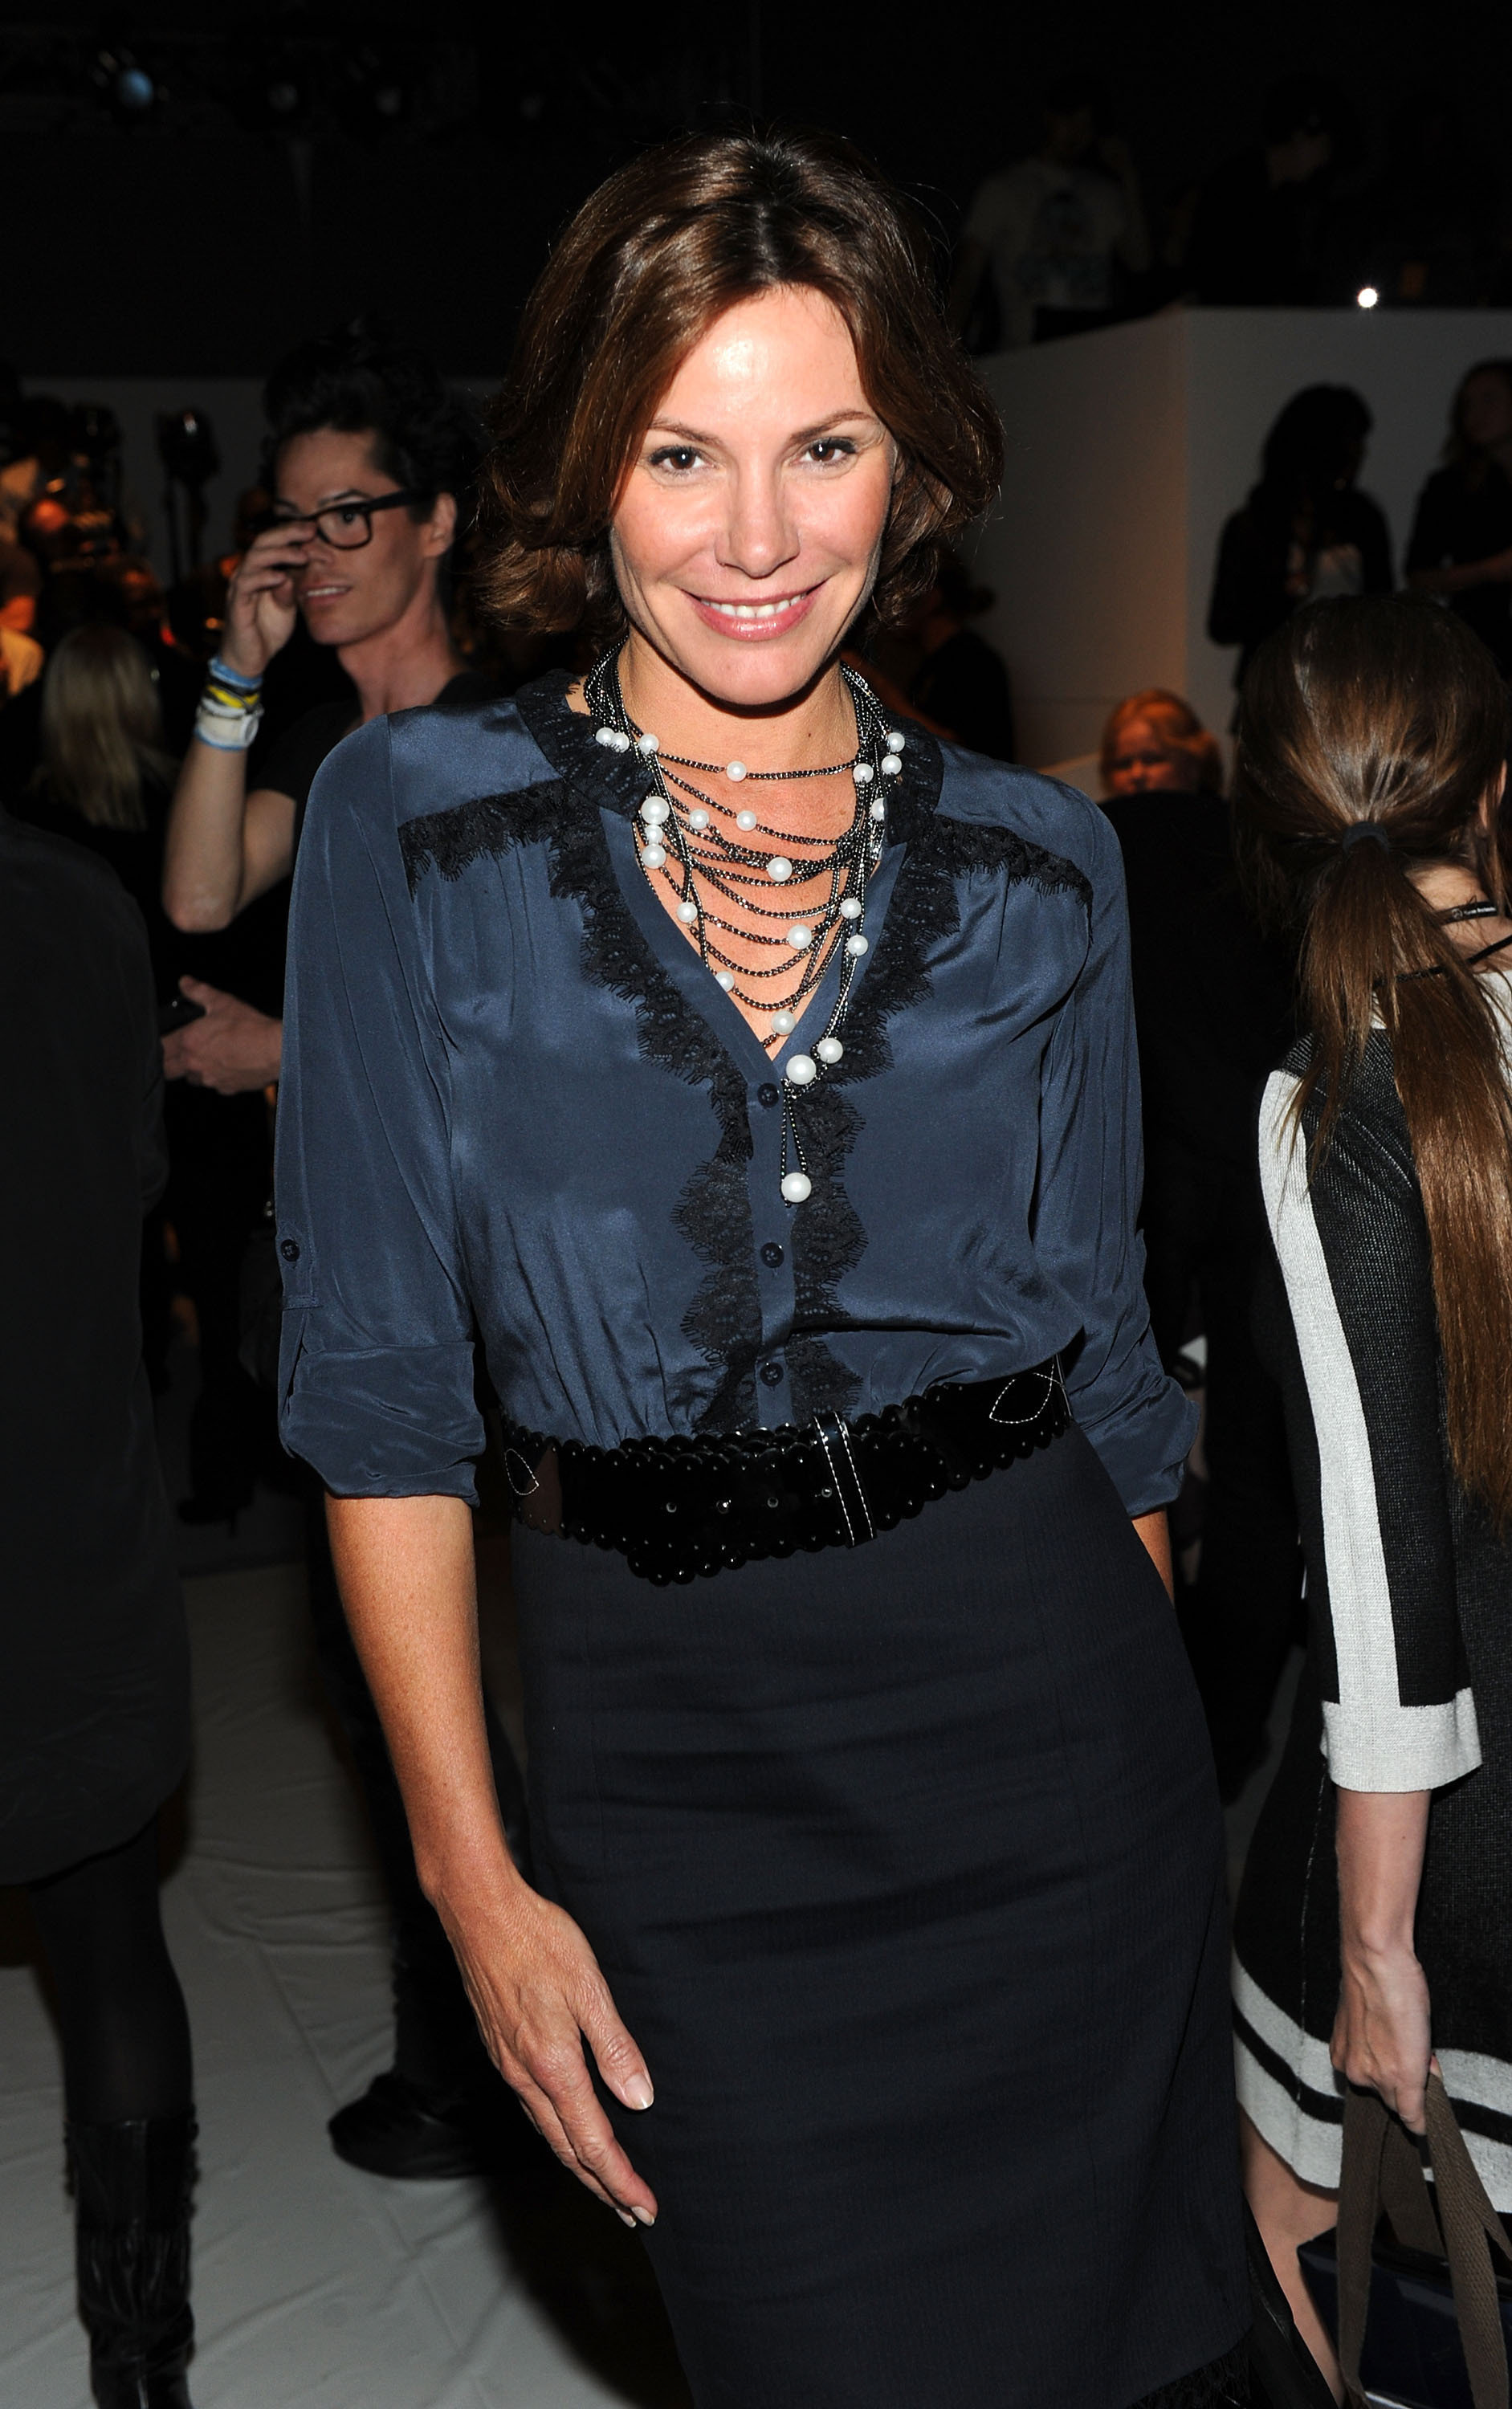 Real Housewives Of New York City Star Countess LuAnn de Lesseps Daughters N-Word Use Unacceptable HuffPost Entertainment